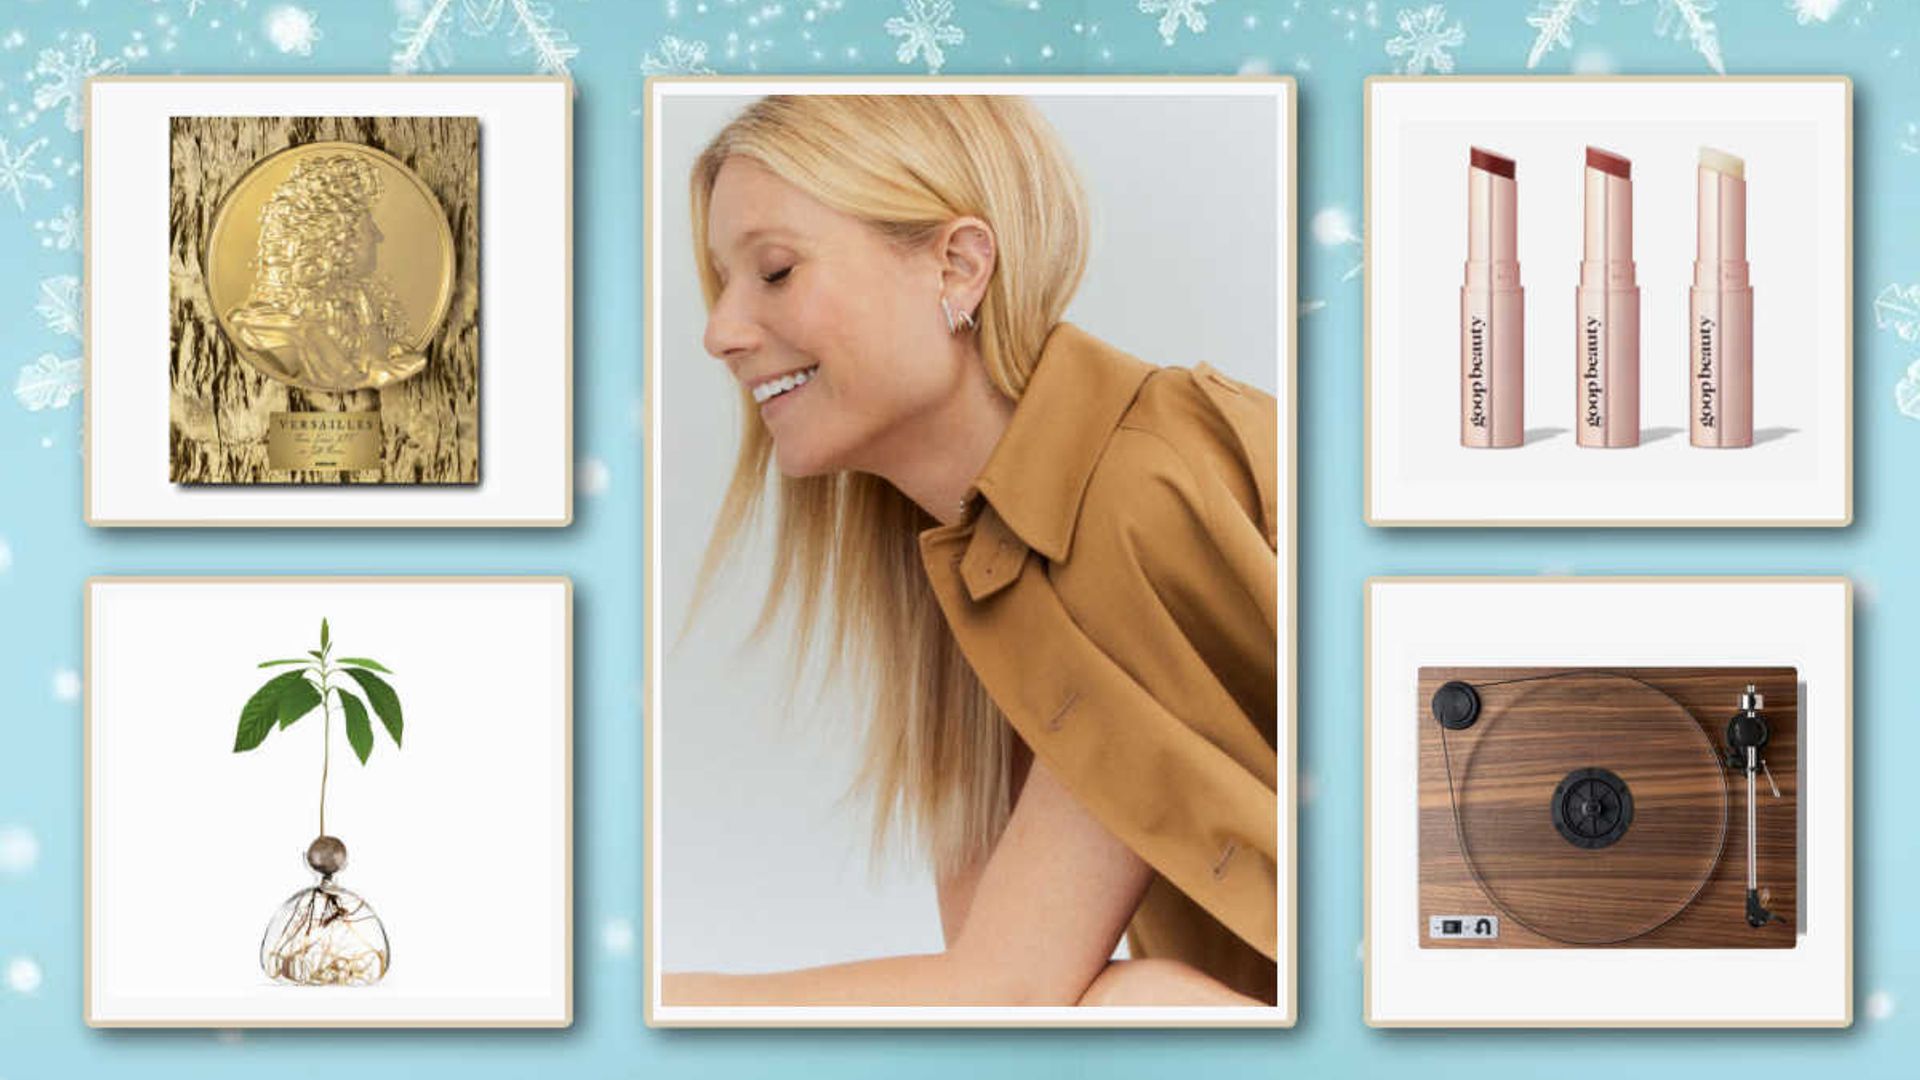 The Best Christmas Gift Ideas for Women Under $25 - The Katherine